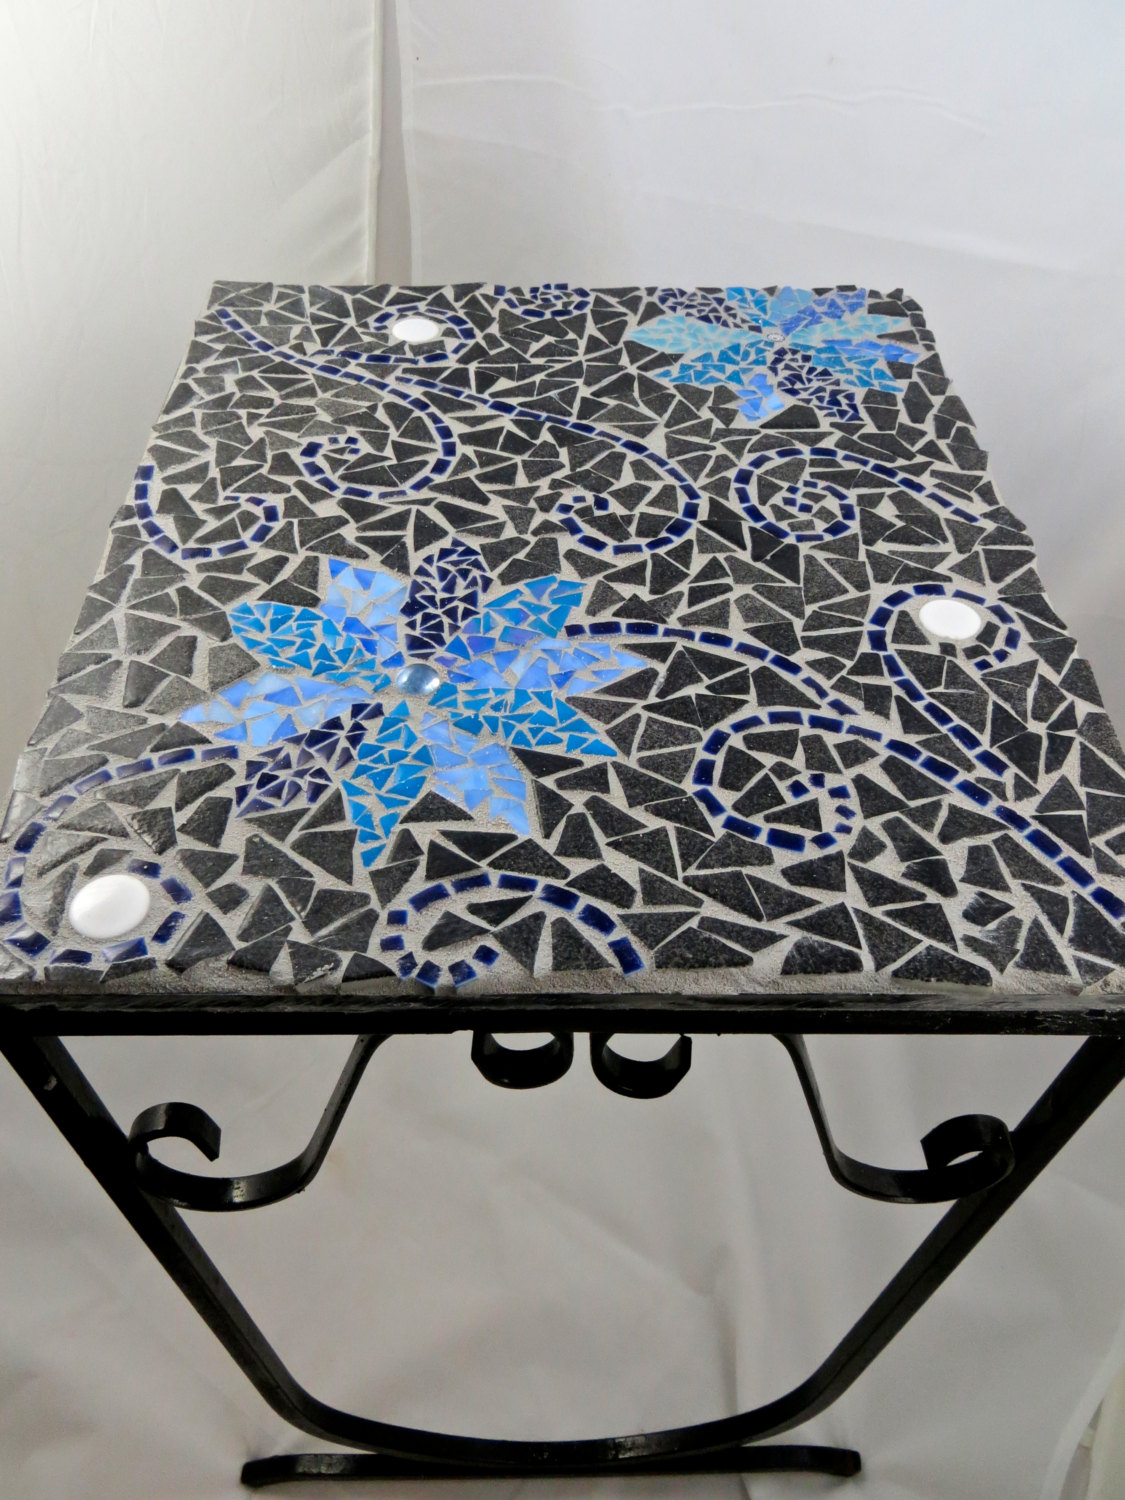 furniture good looking for outdoor living room design and decoration using square black ceramic blue flower mosaic table marvelous space with out accent indoor glass end tables